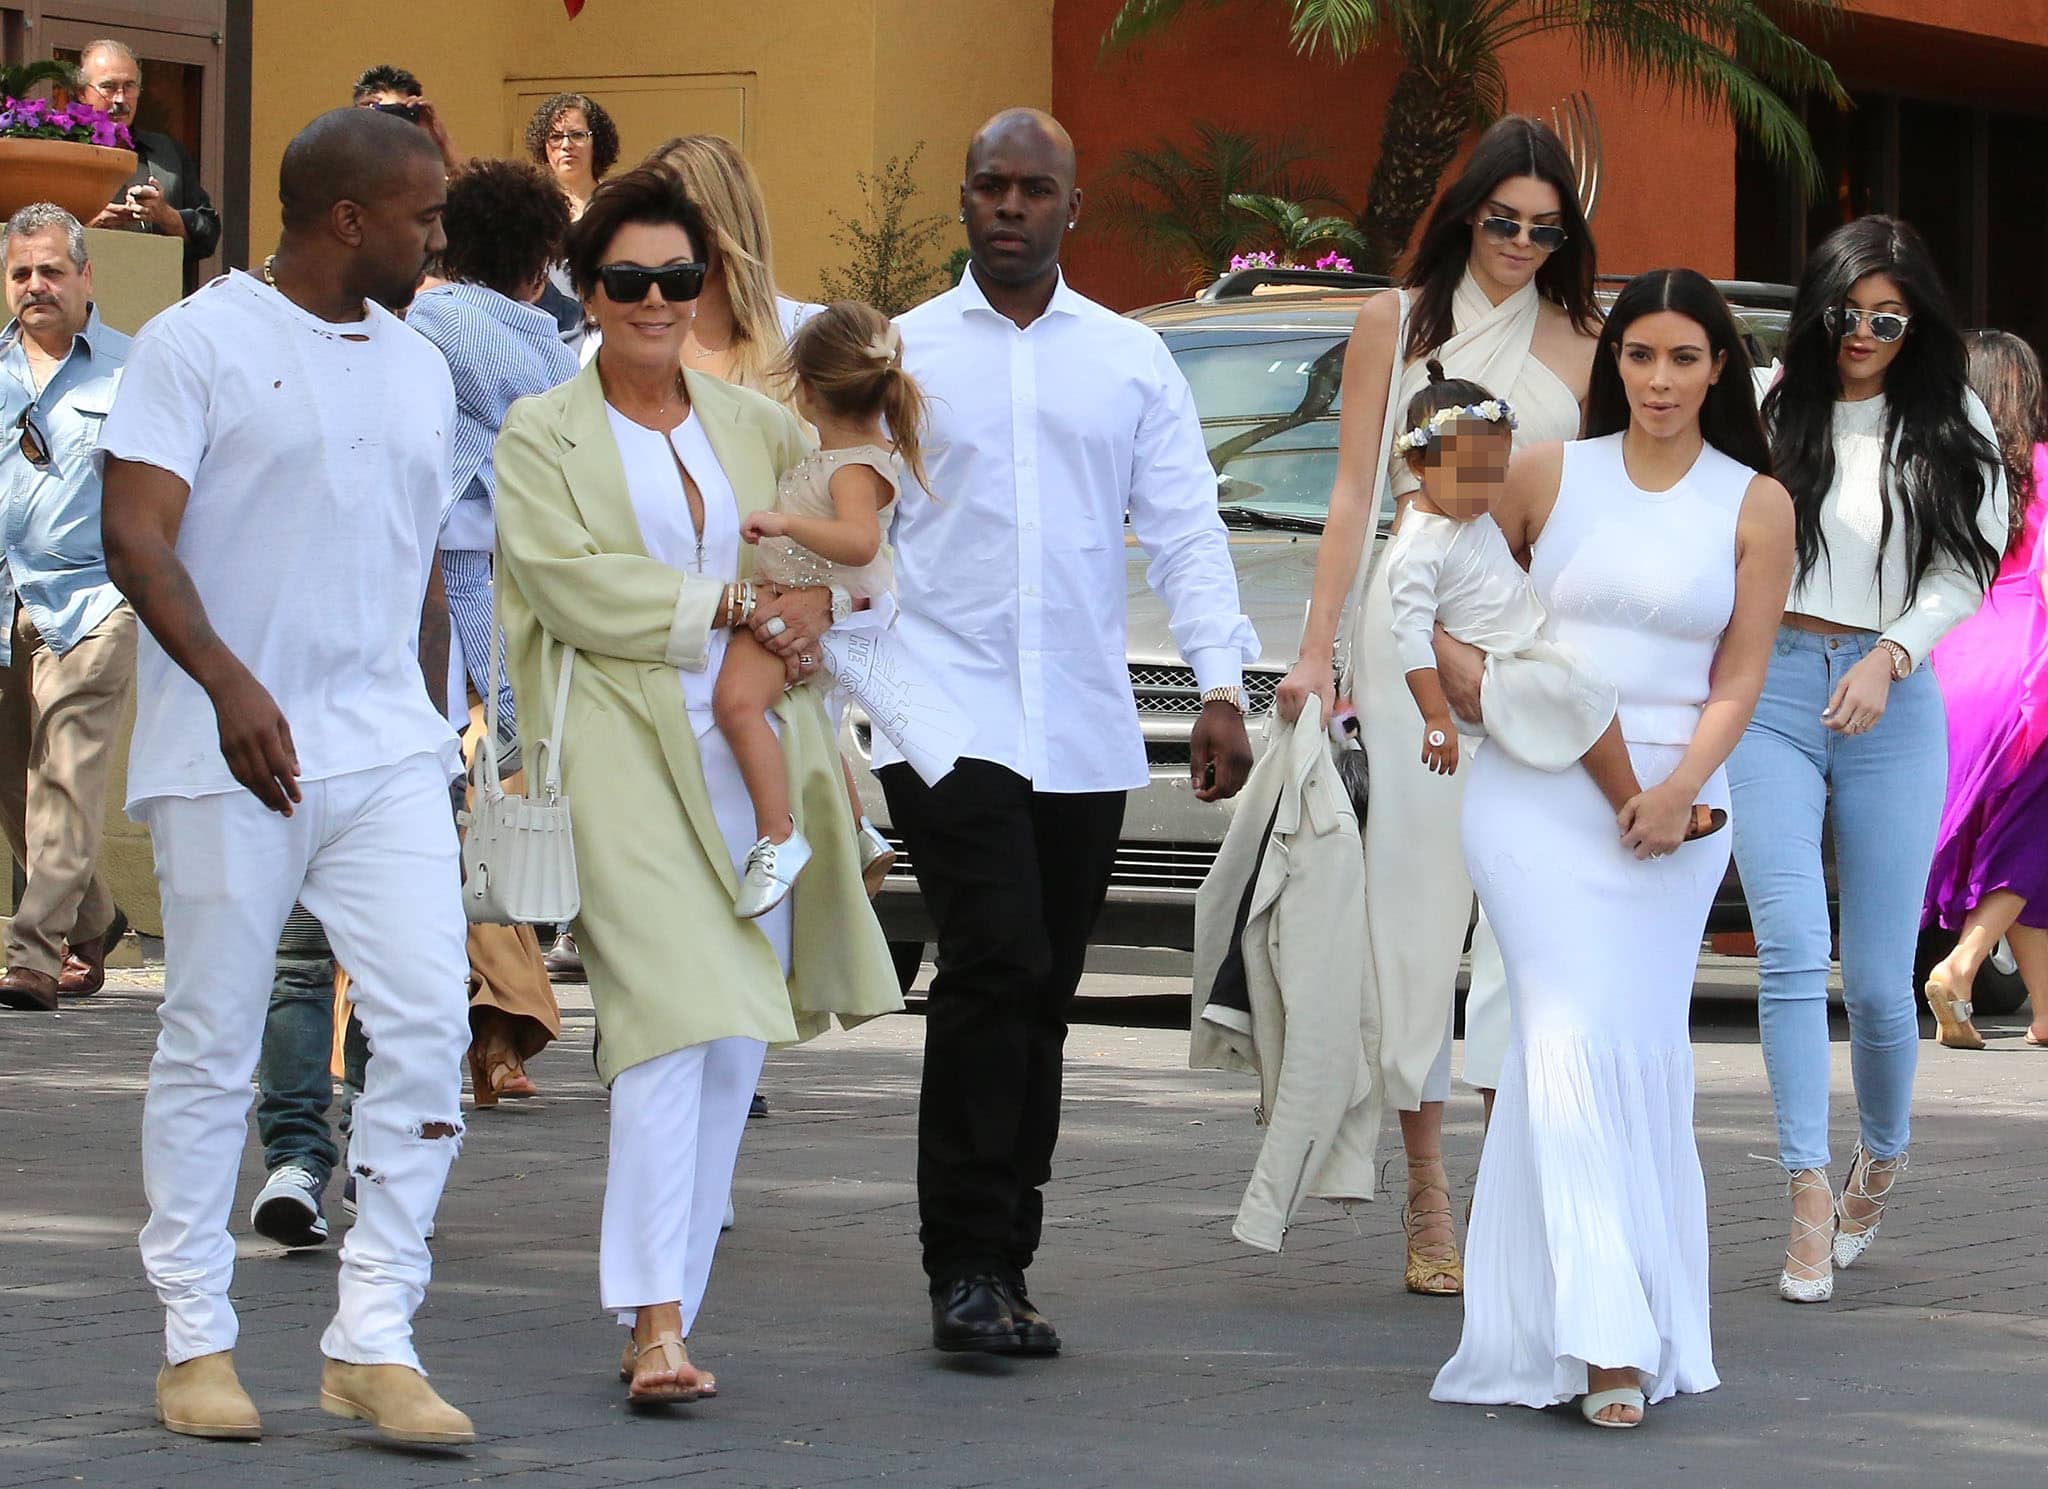 The Kardashian-Jenner family turn heads in striking white outfits as they attend church in Woodland Hills on April 5, 2015